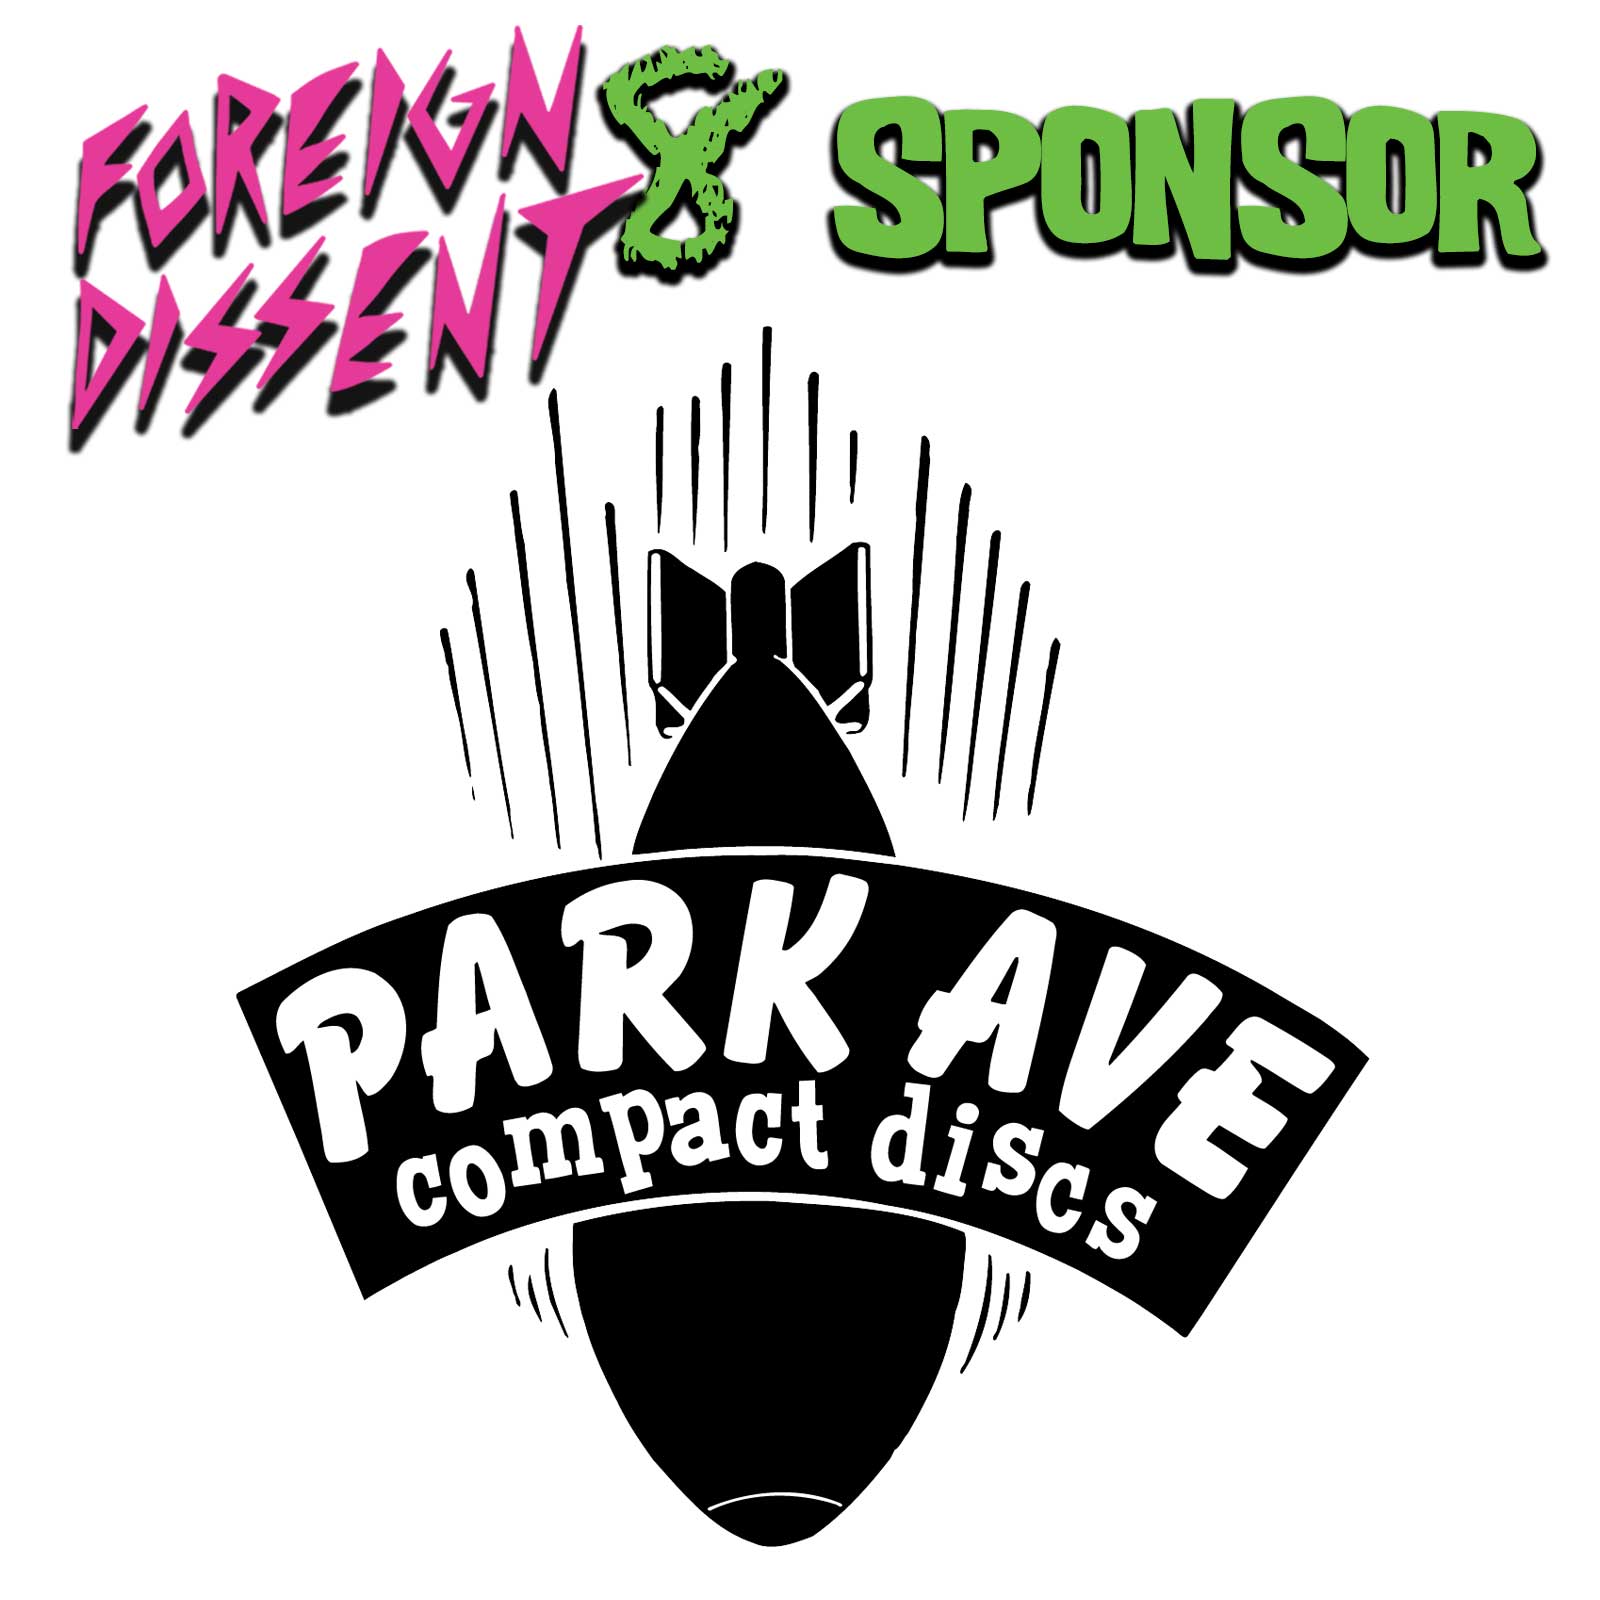 Park Ave CDs is a sponsor of Foreign Dissent 8